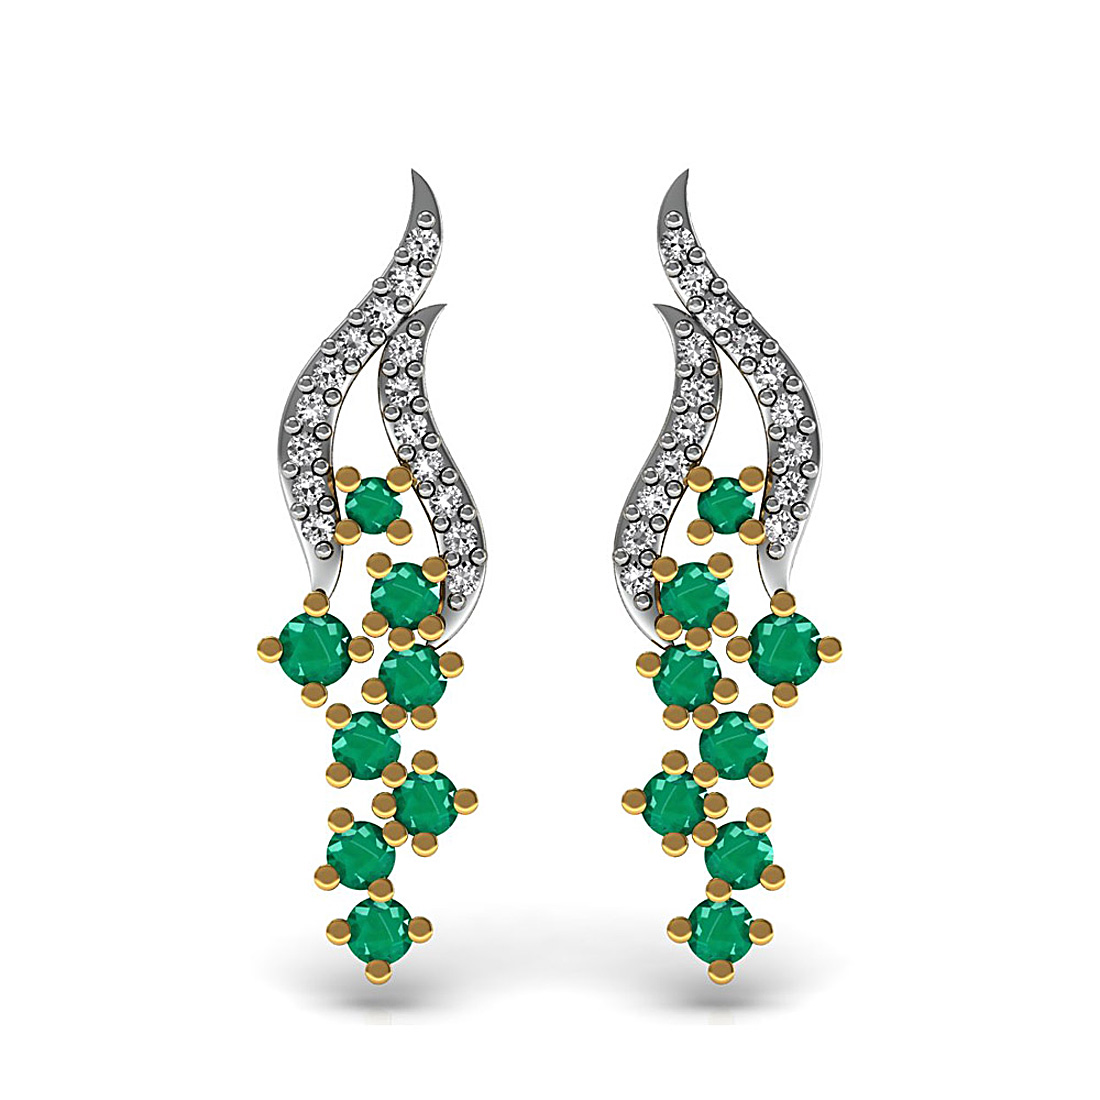 Emerald gemstone floral stud earrings made in 18K solid yellow gold adorned with genuine diamond.